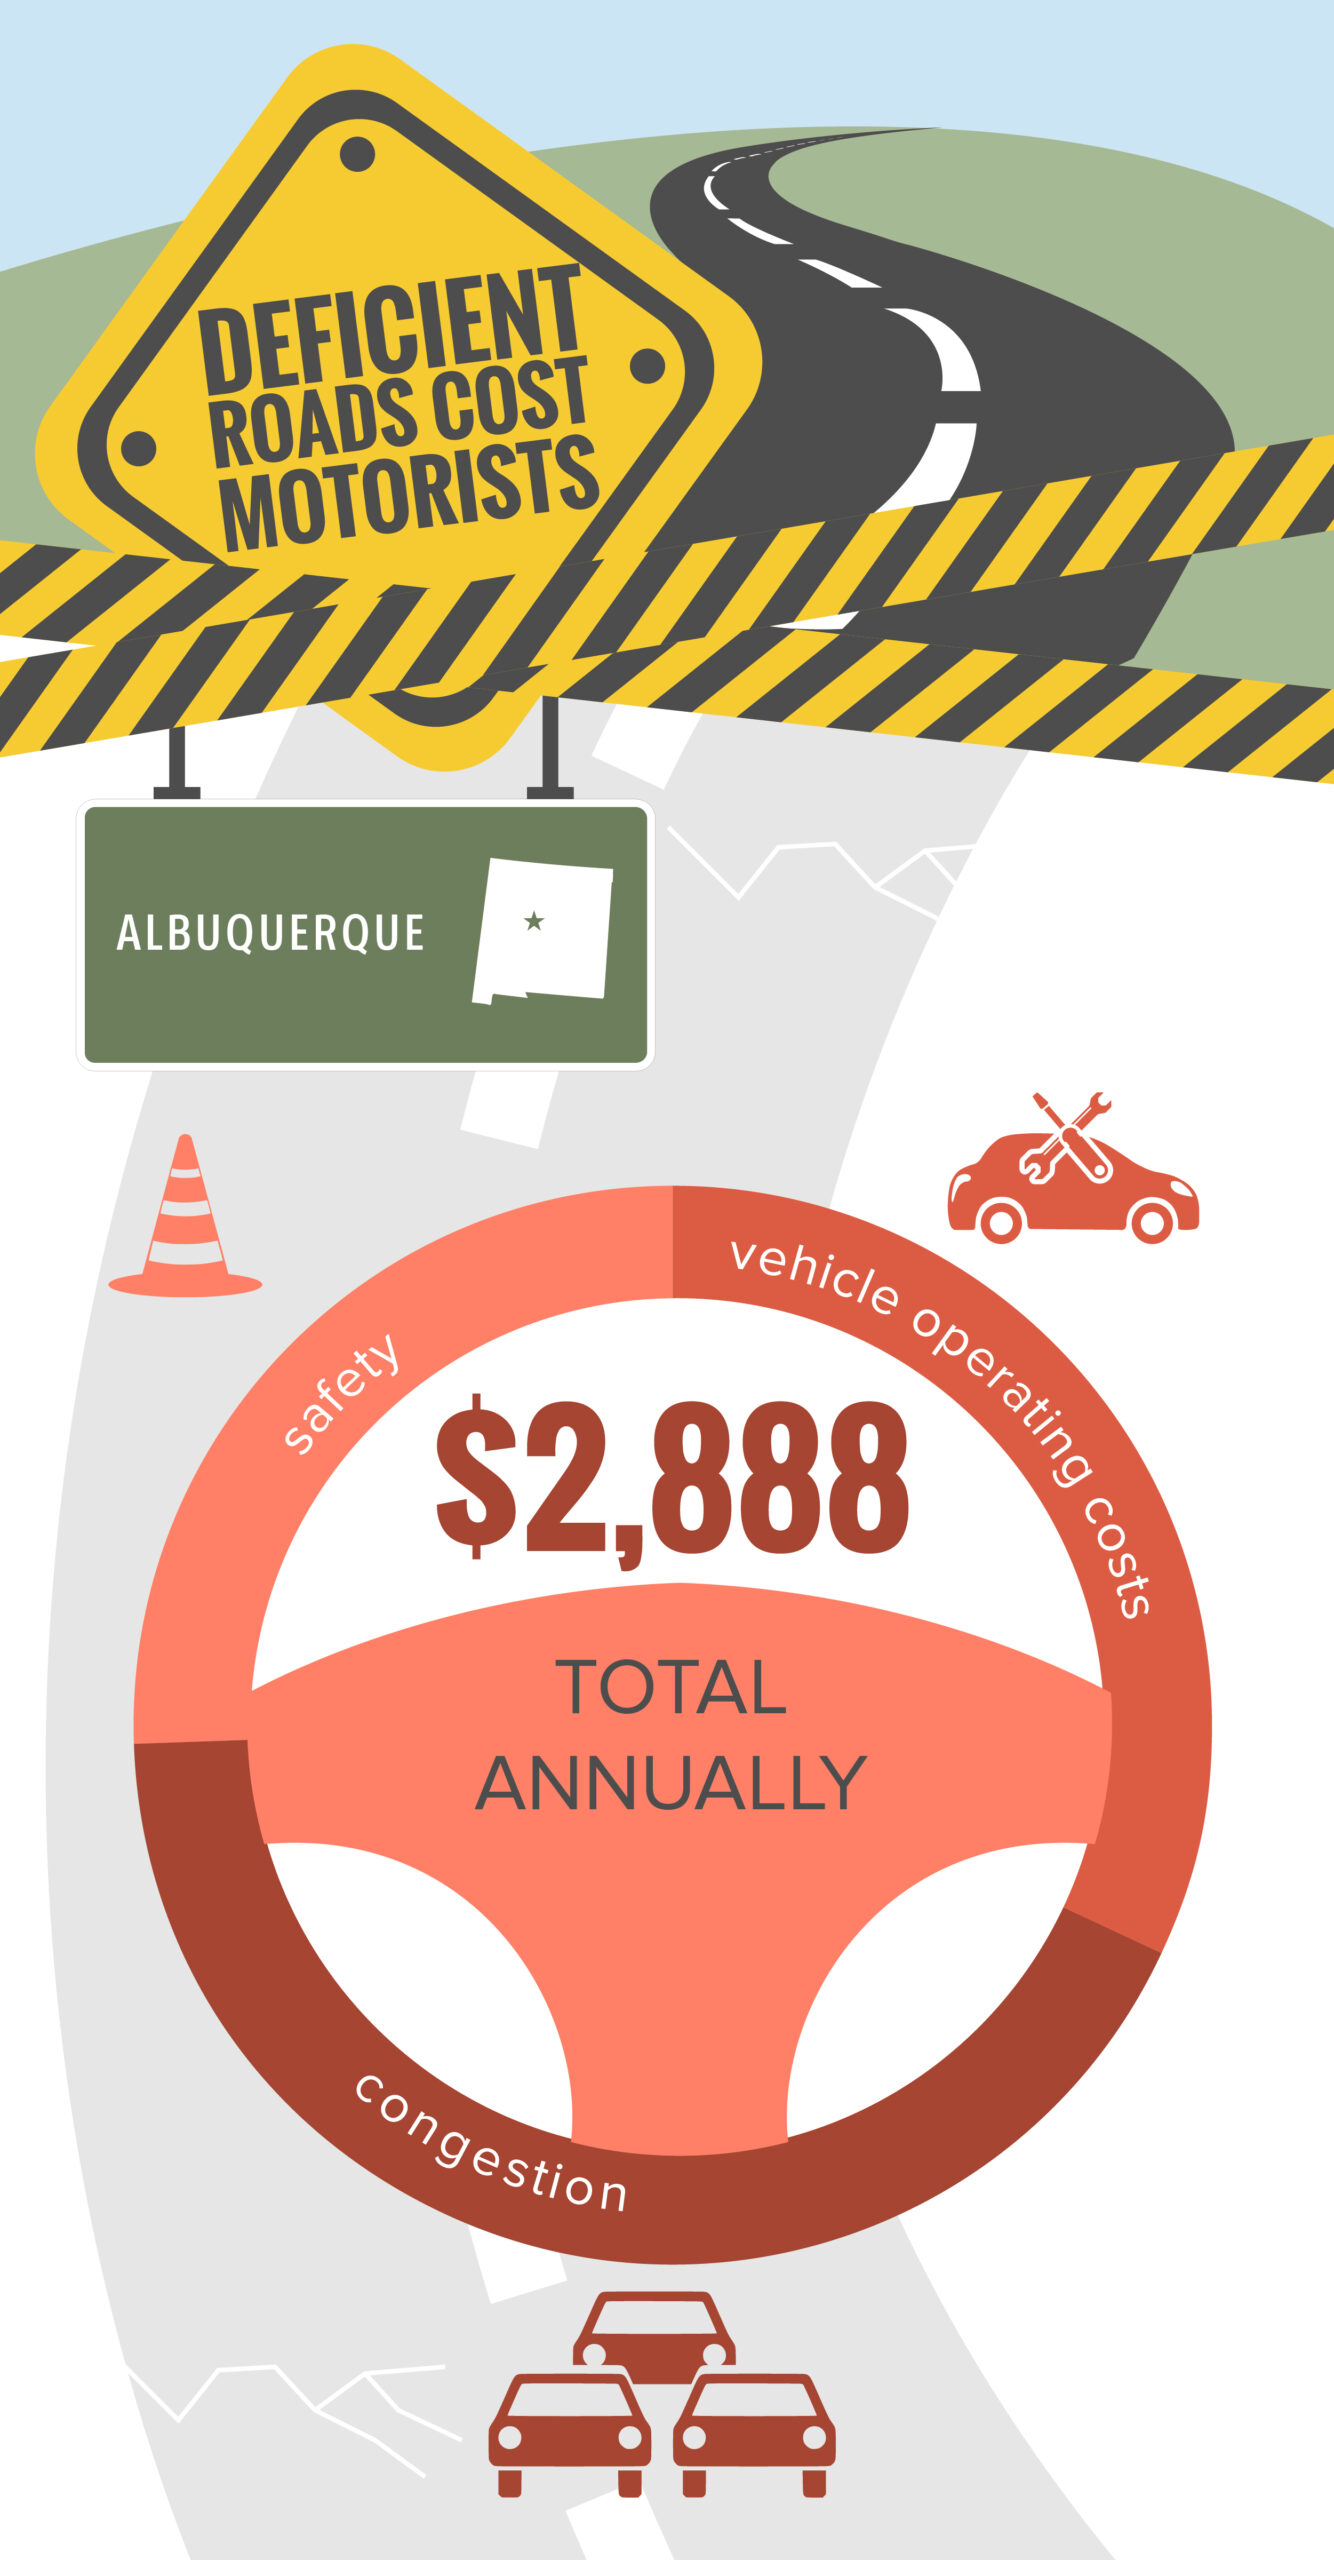 Albuquerque Deficient Roads Cost to Motorists Infographic – February 2023